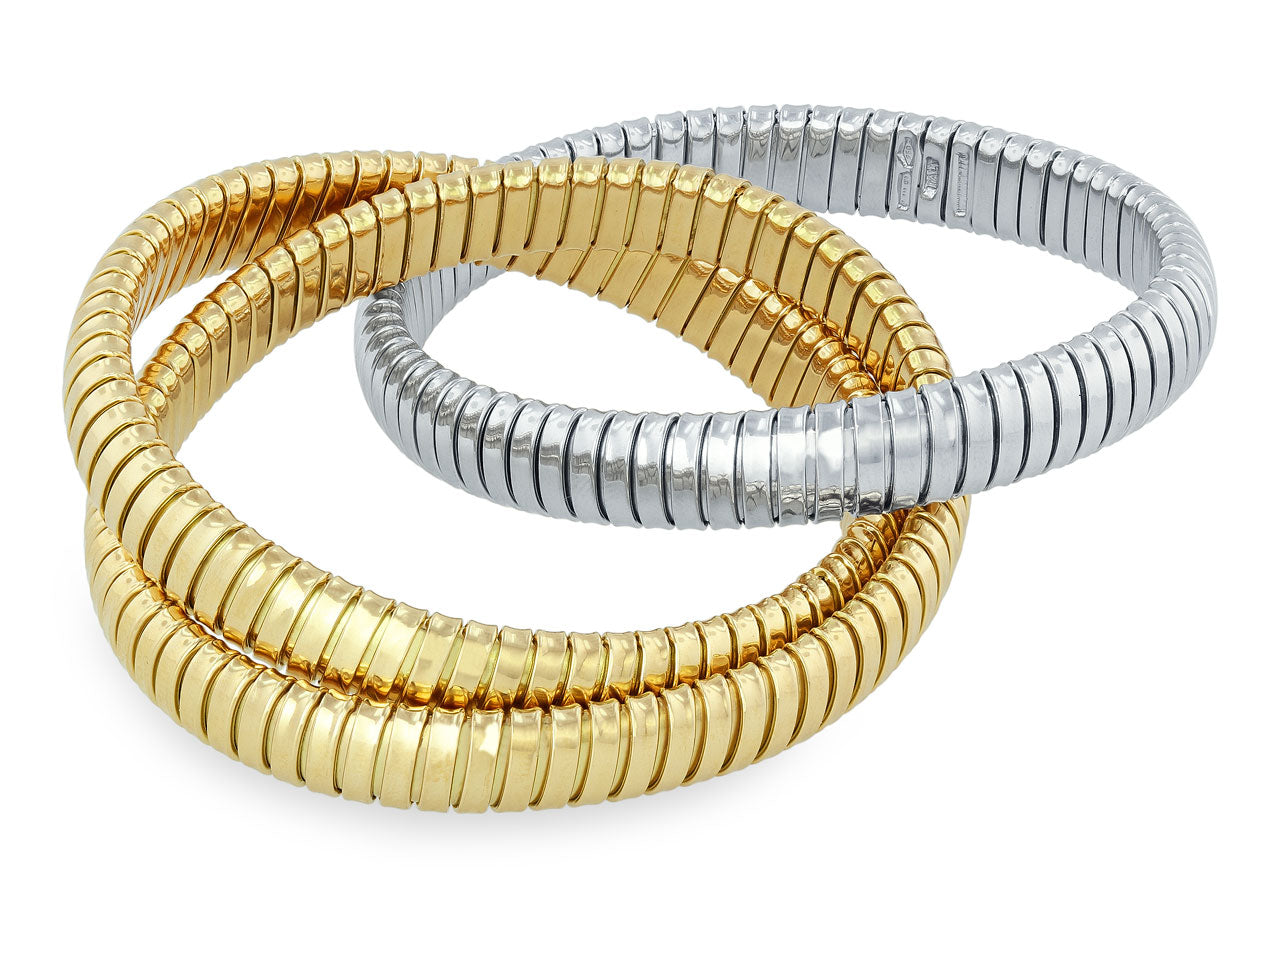 Rolling Bracelet in 18K Yellow and White Gold, 9mm, by Beladora